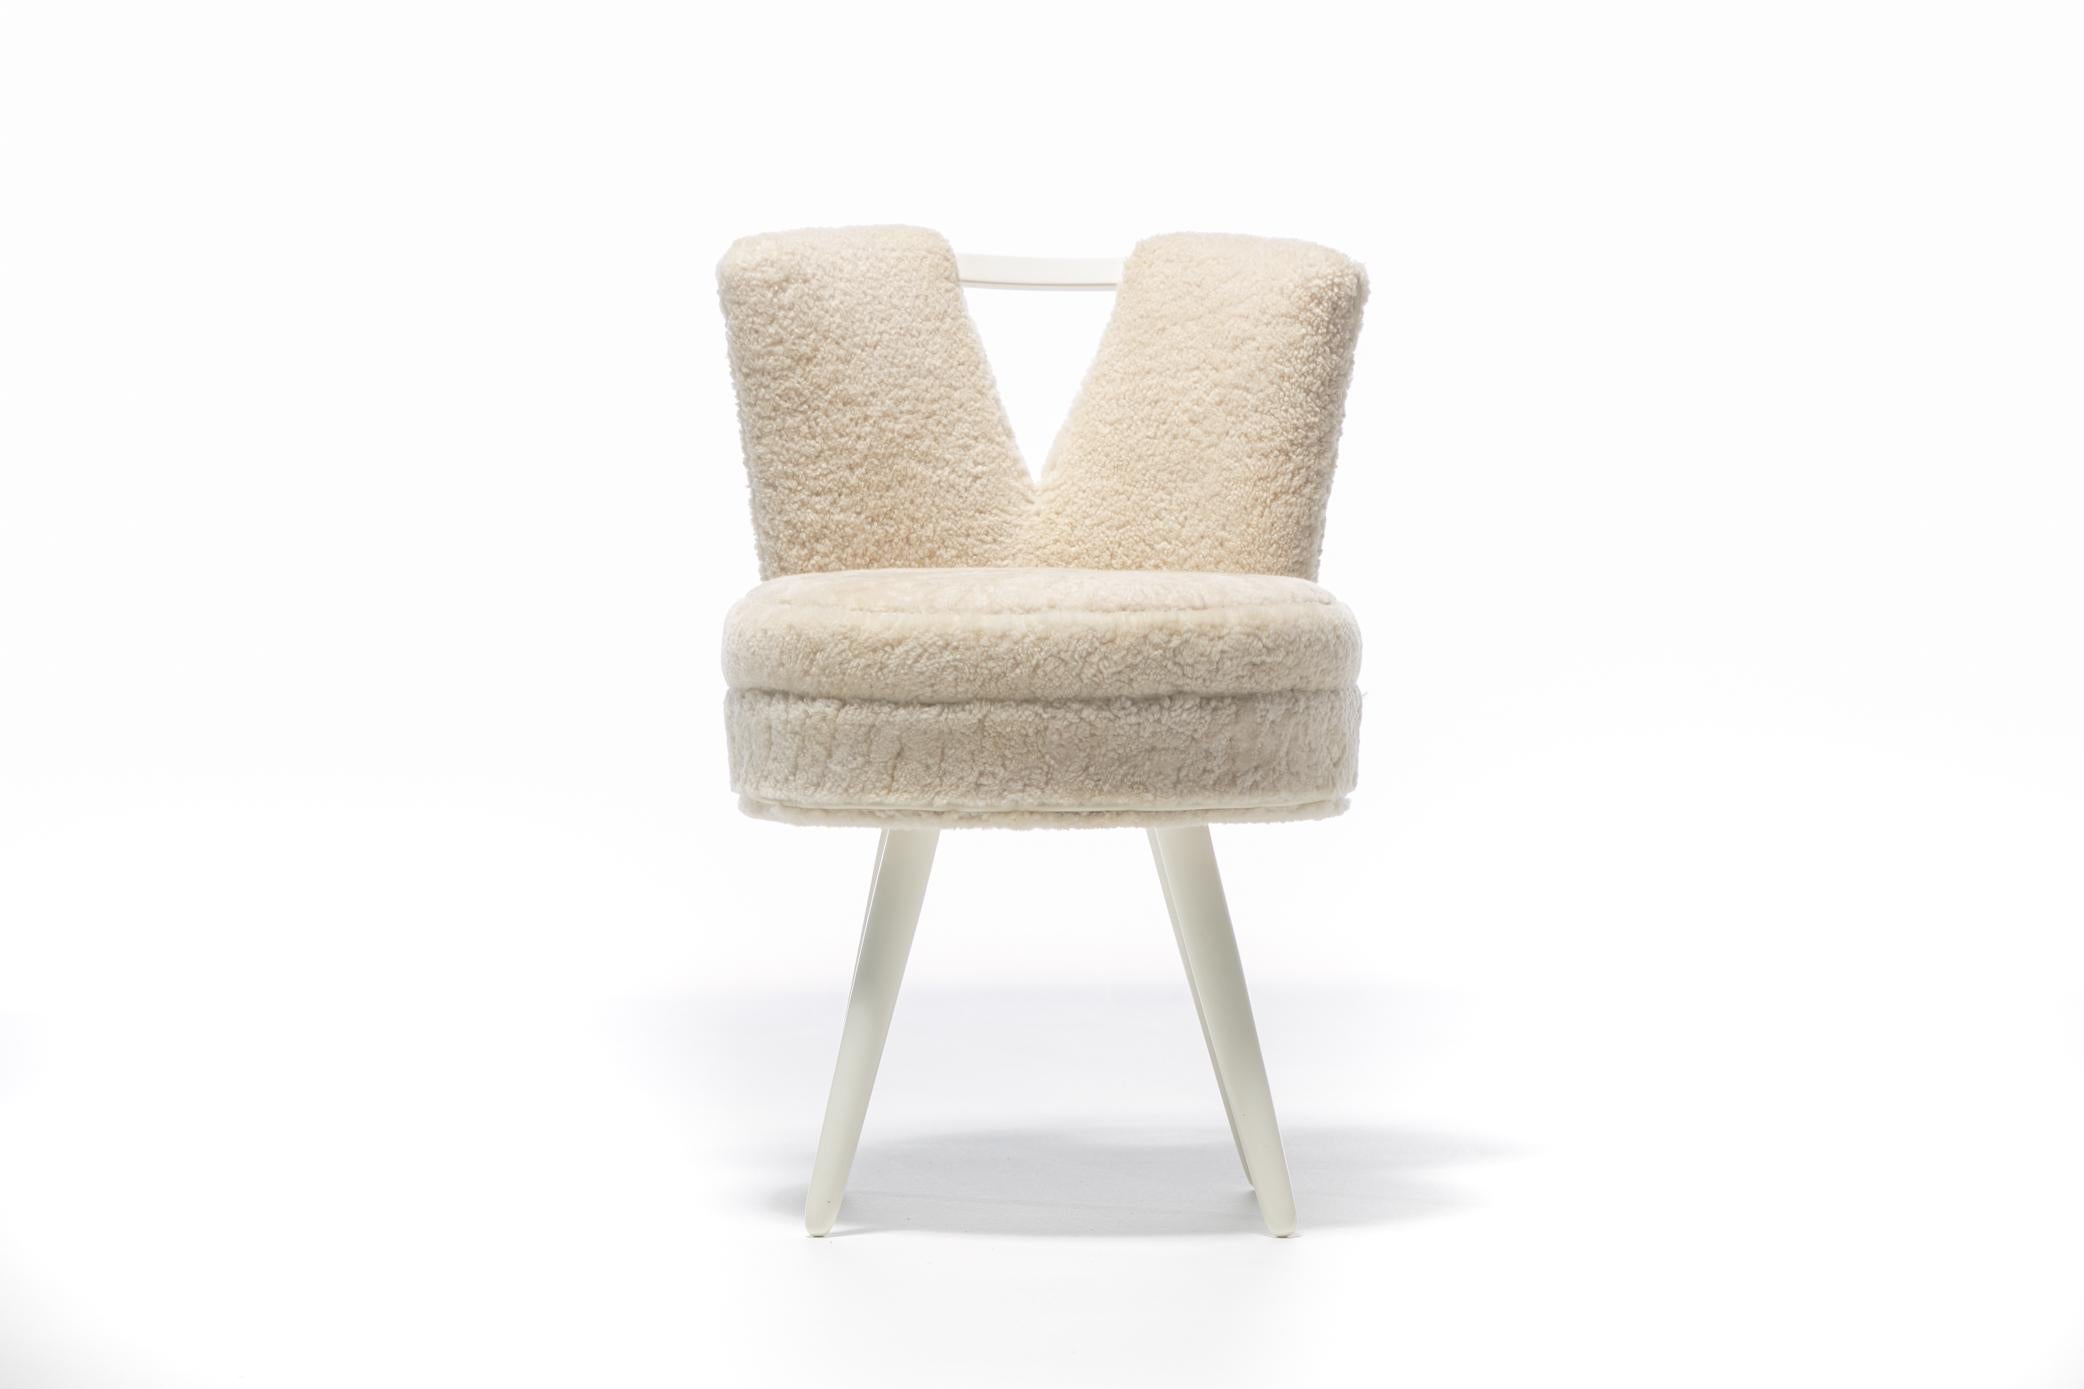 Custom Vanity Stool in Ivory Cream Shearling with Leather Trim 7